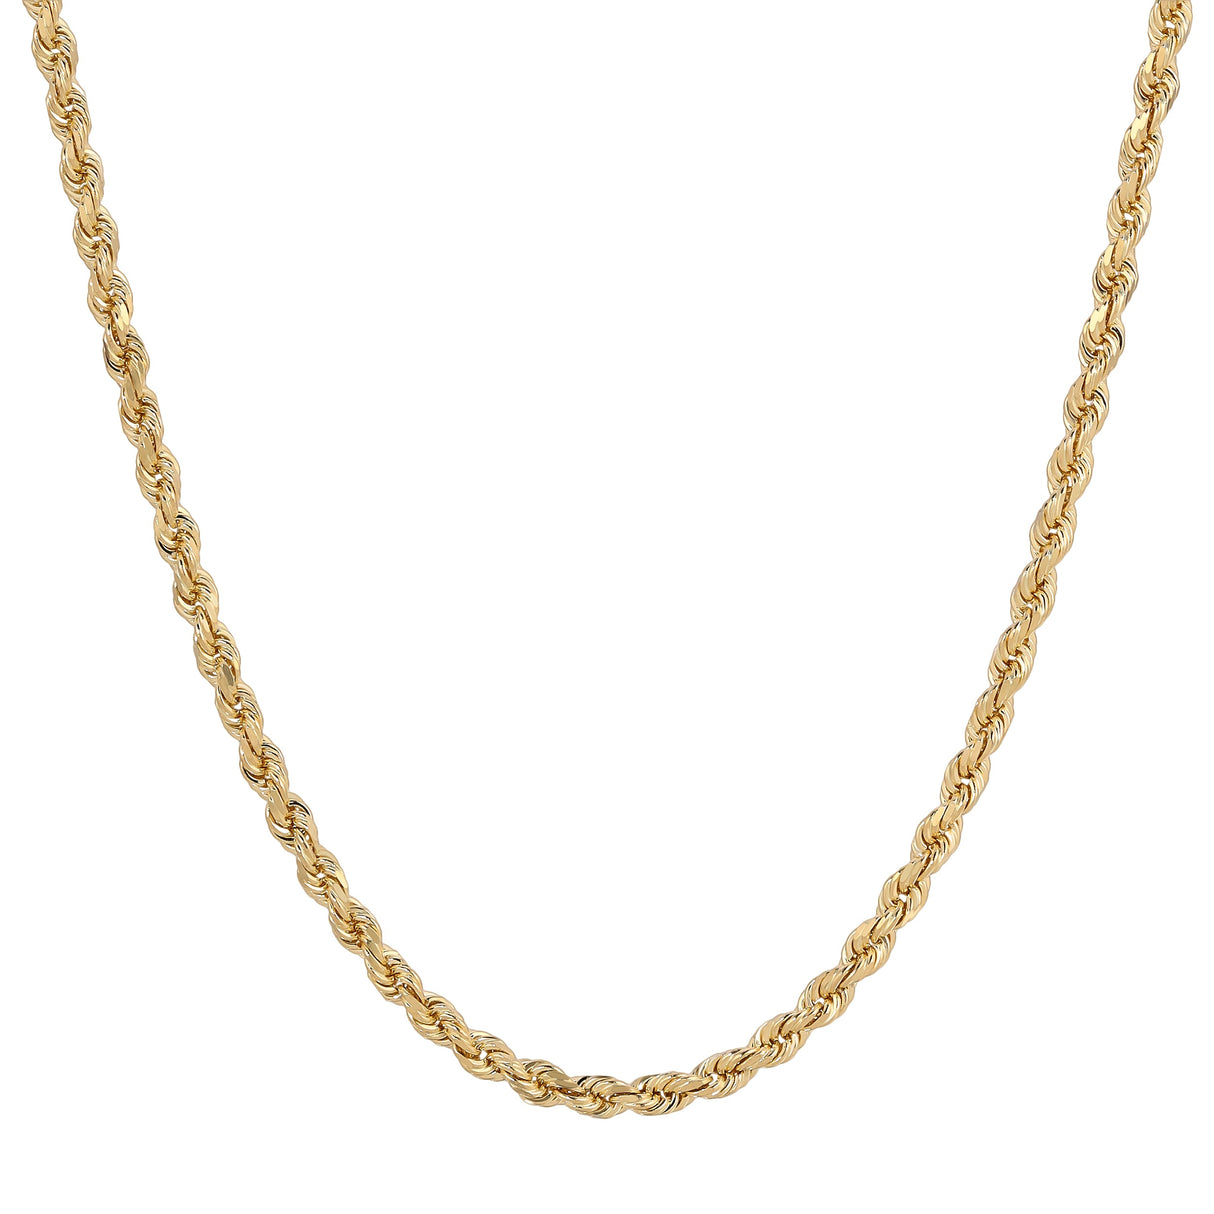 Perfect men's gold chain (10K yellow gold, 1.5mm-6.0mm) at Italian Fashions.